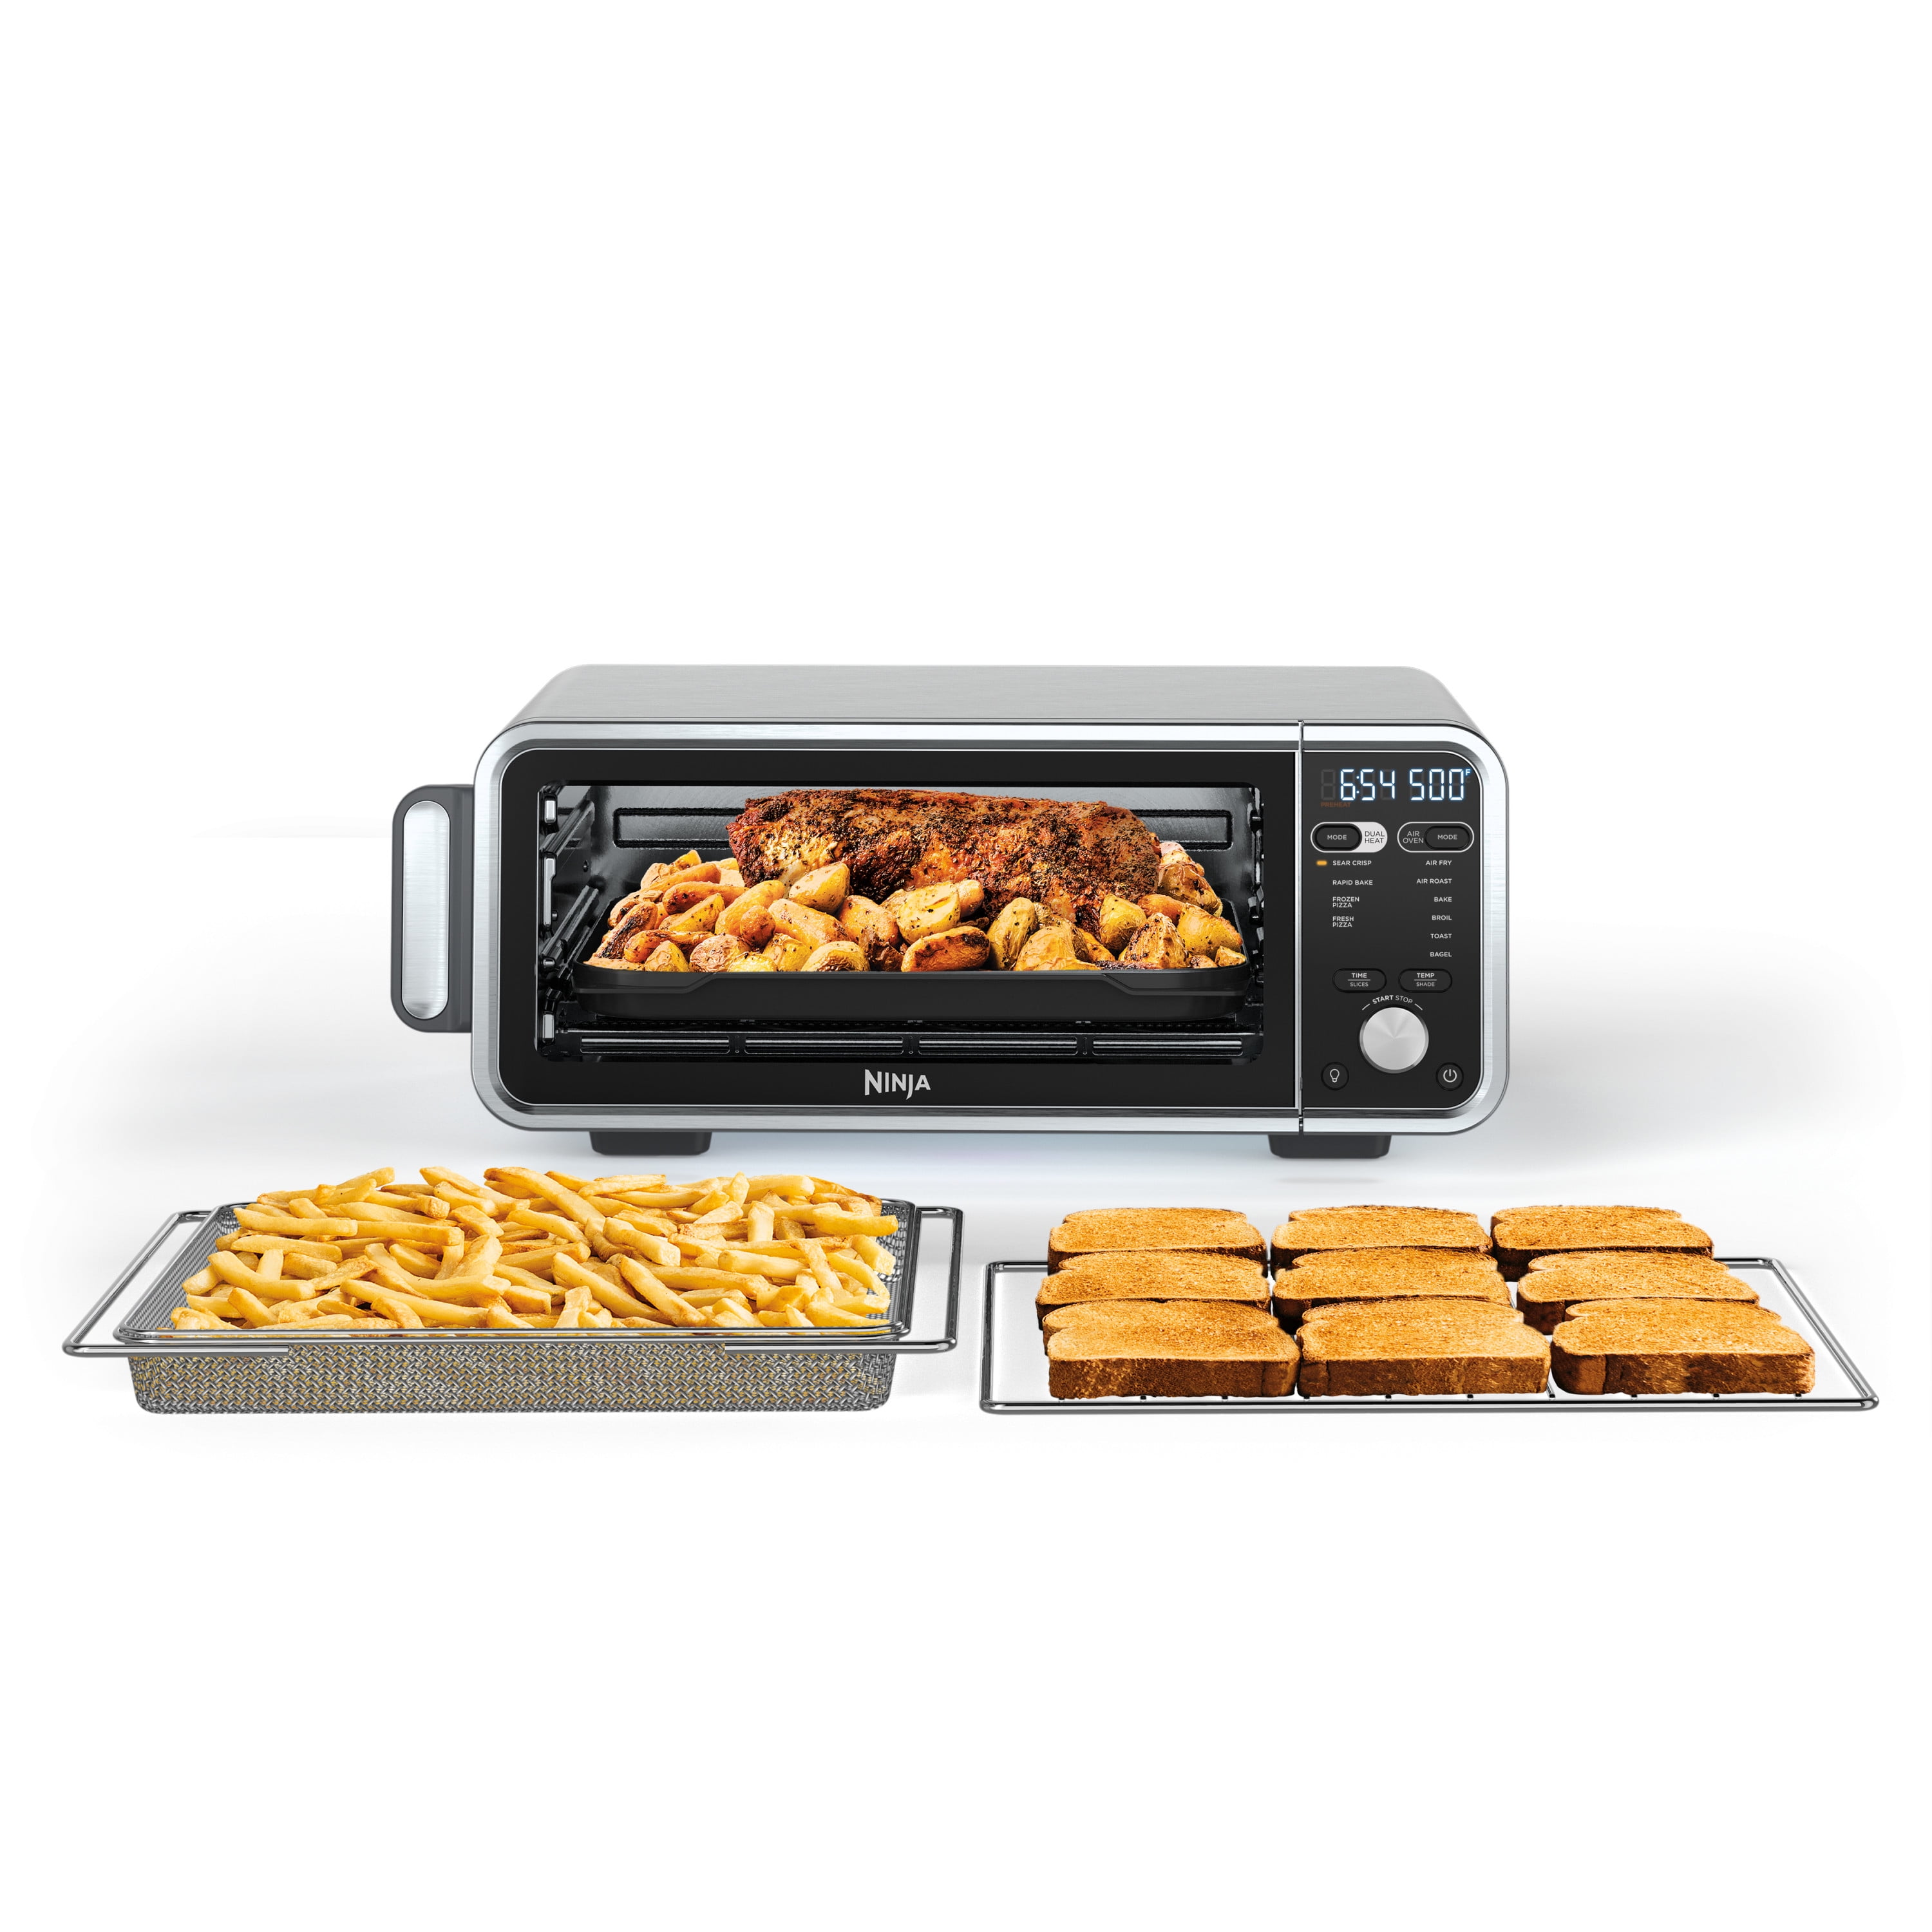 Elite Cuisine 23 Liter Toaster Oven With Rotisserie up to 450 Degrees Cooking for sale online 